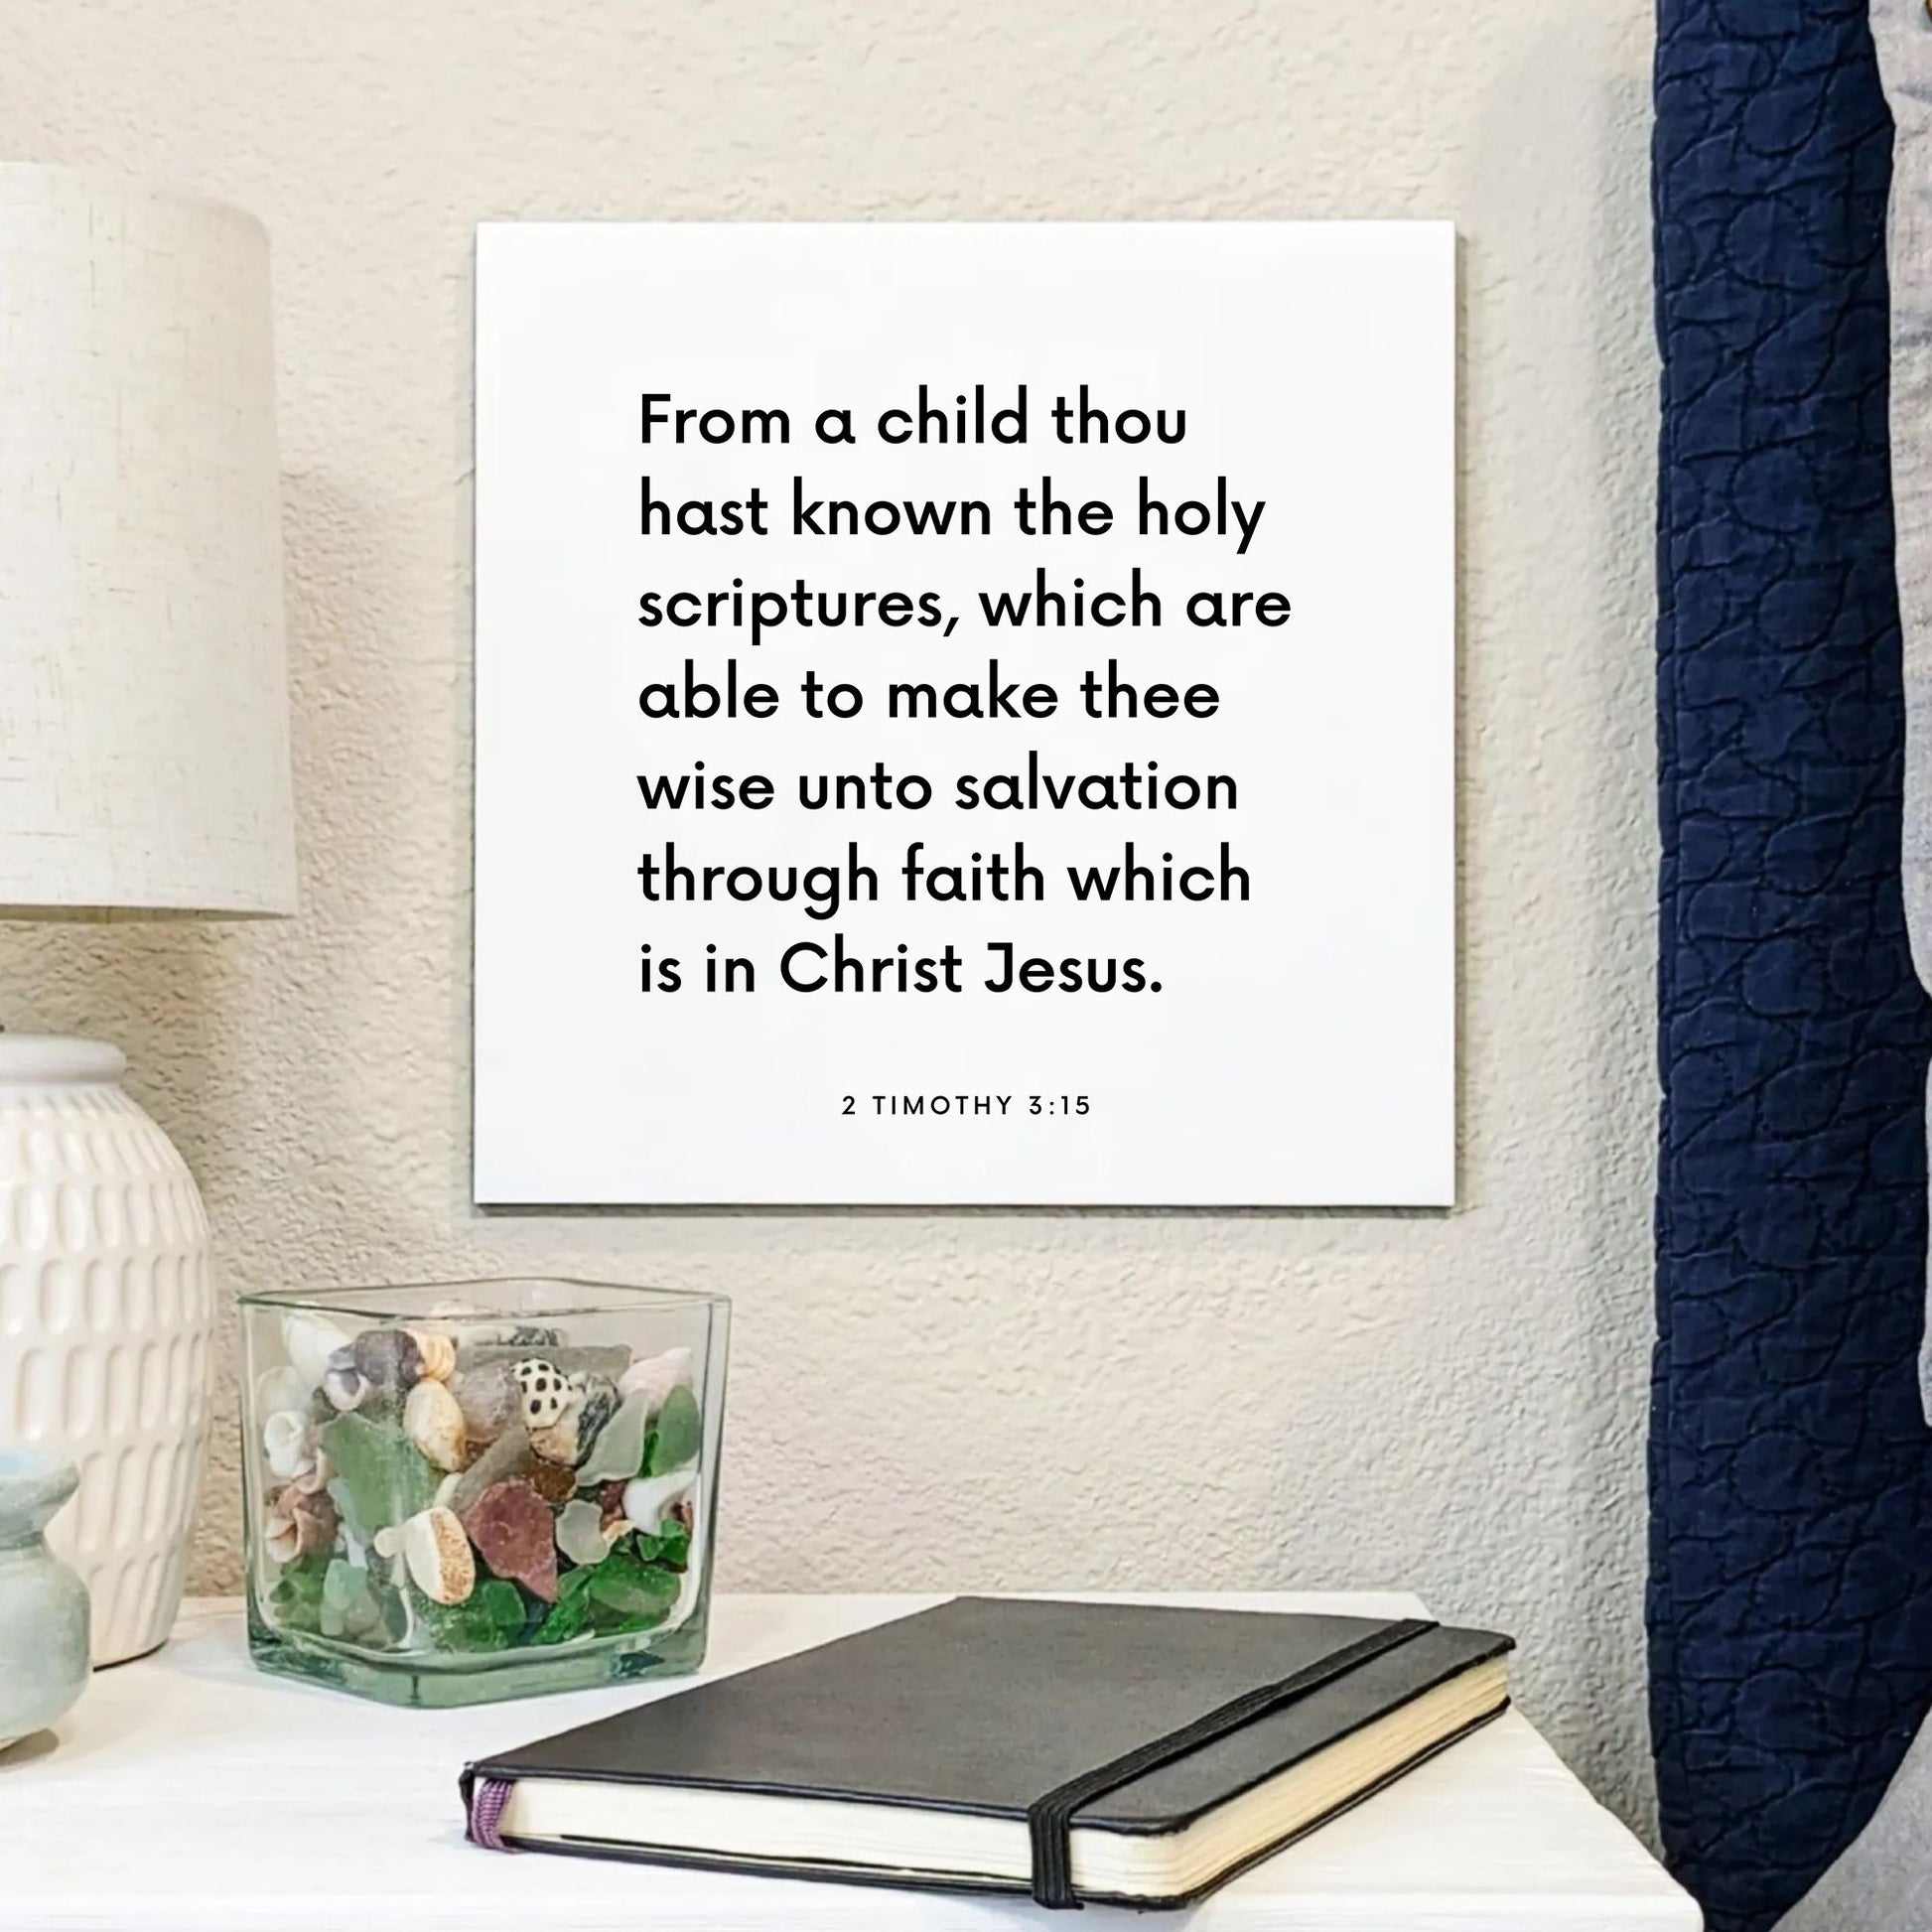 Bedside mouting of the scripture tile for 2 Timothy 3:15  - "From a child thou hast known the holy scriptures"